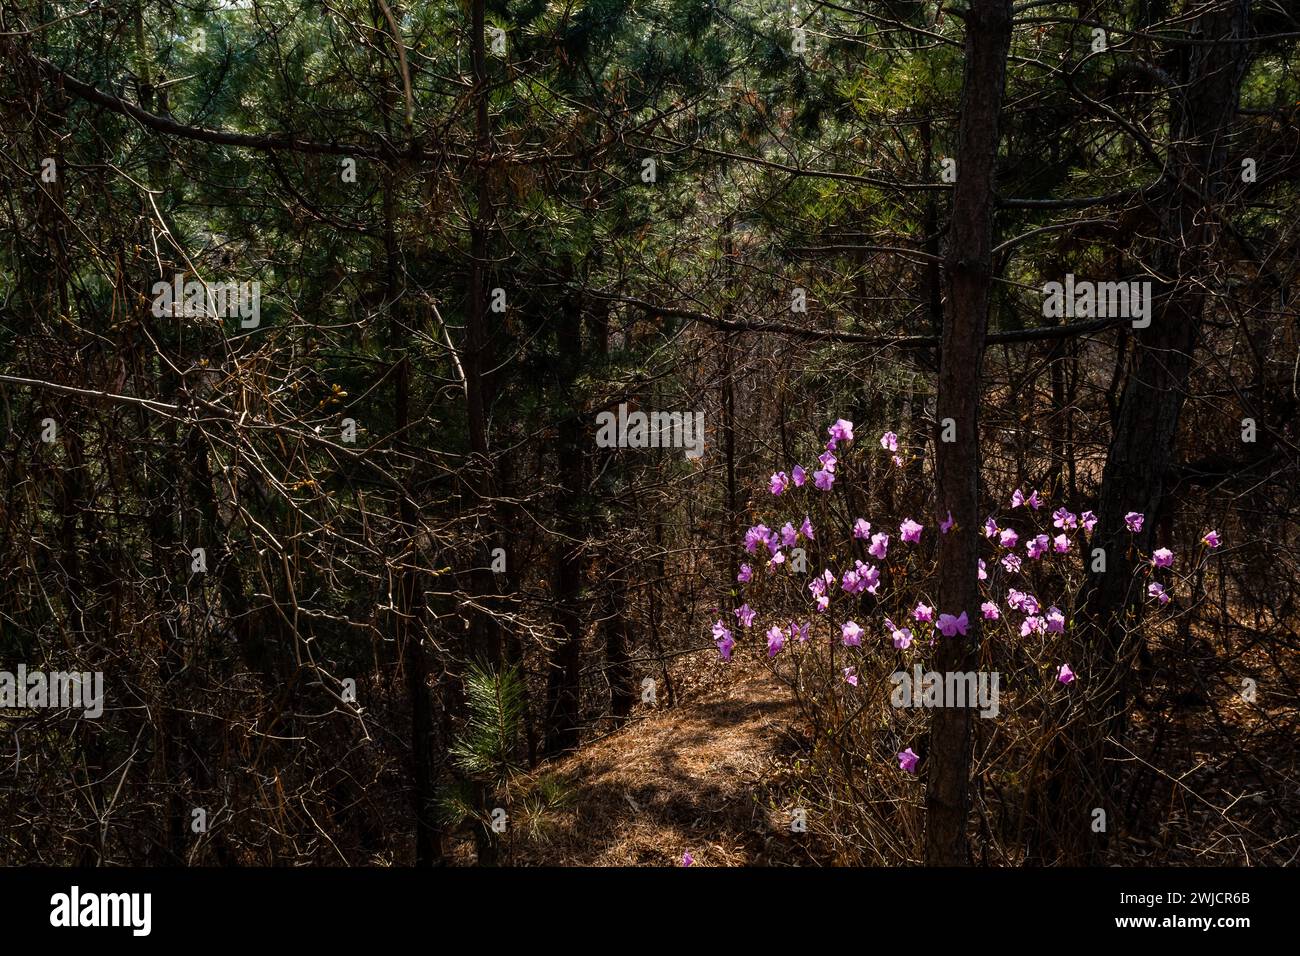 Bunch of lilac colored flowers bathed in soft sunlight in next to path in dense forest in South Korea Stock Photo